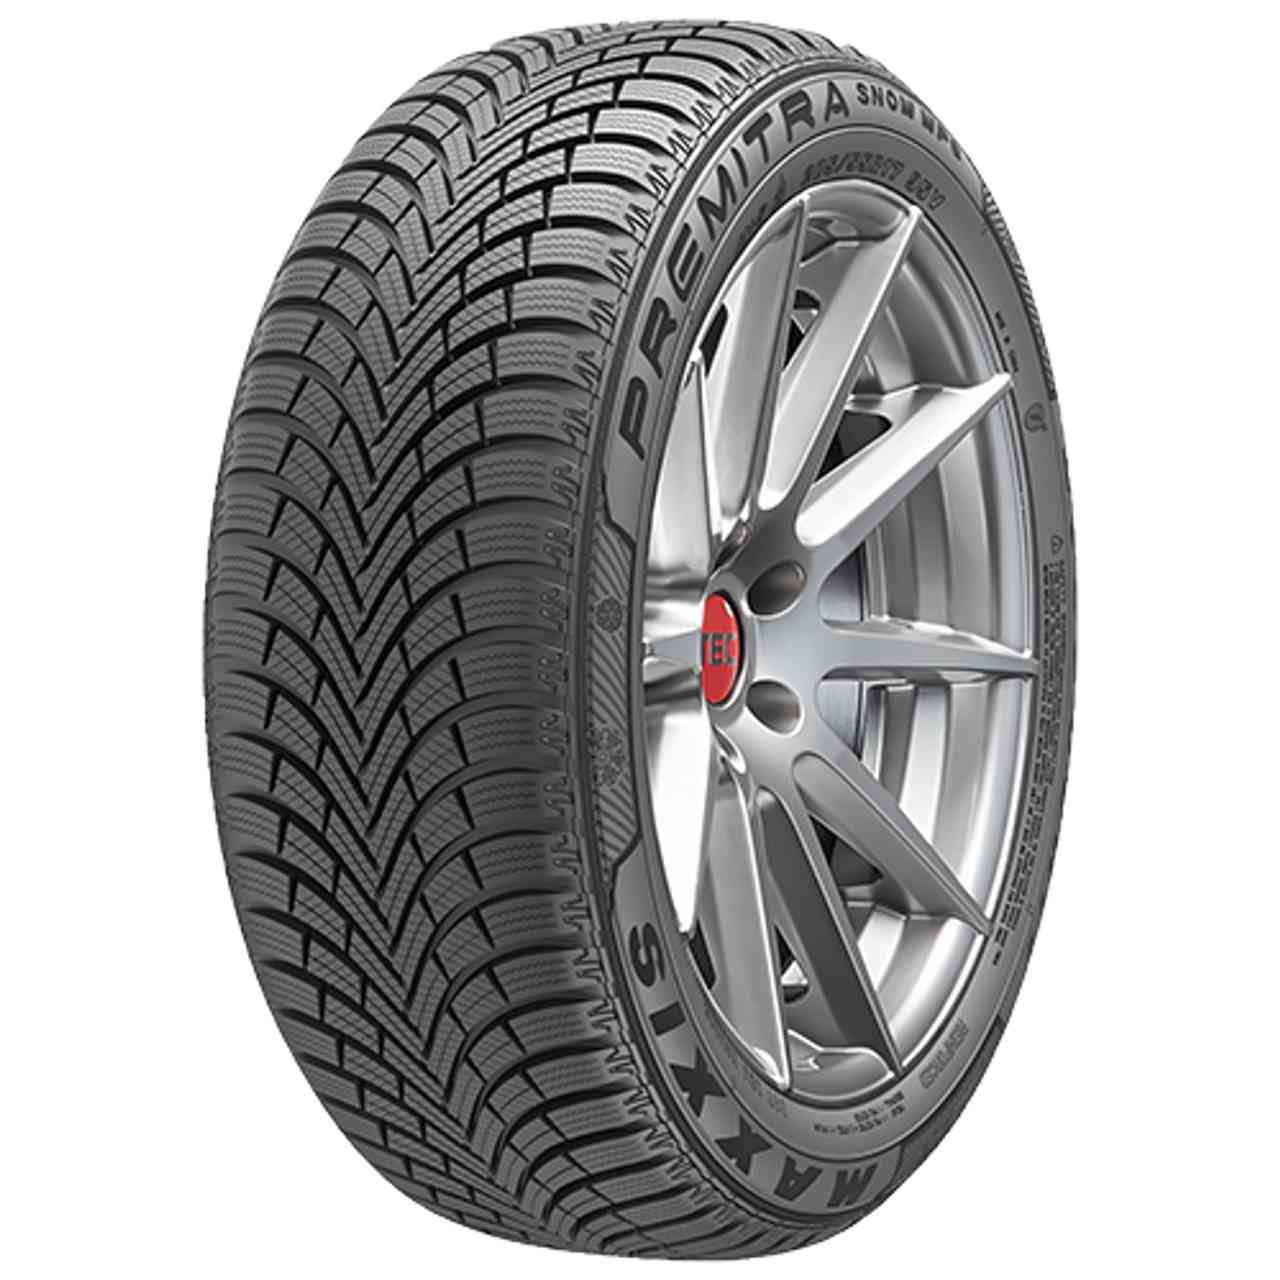 MAXXIS PREMITRA SNOW WP6 205/60R16 96H BSW